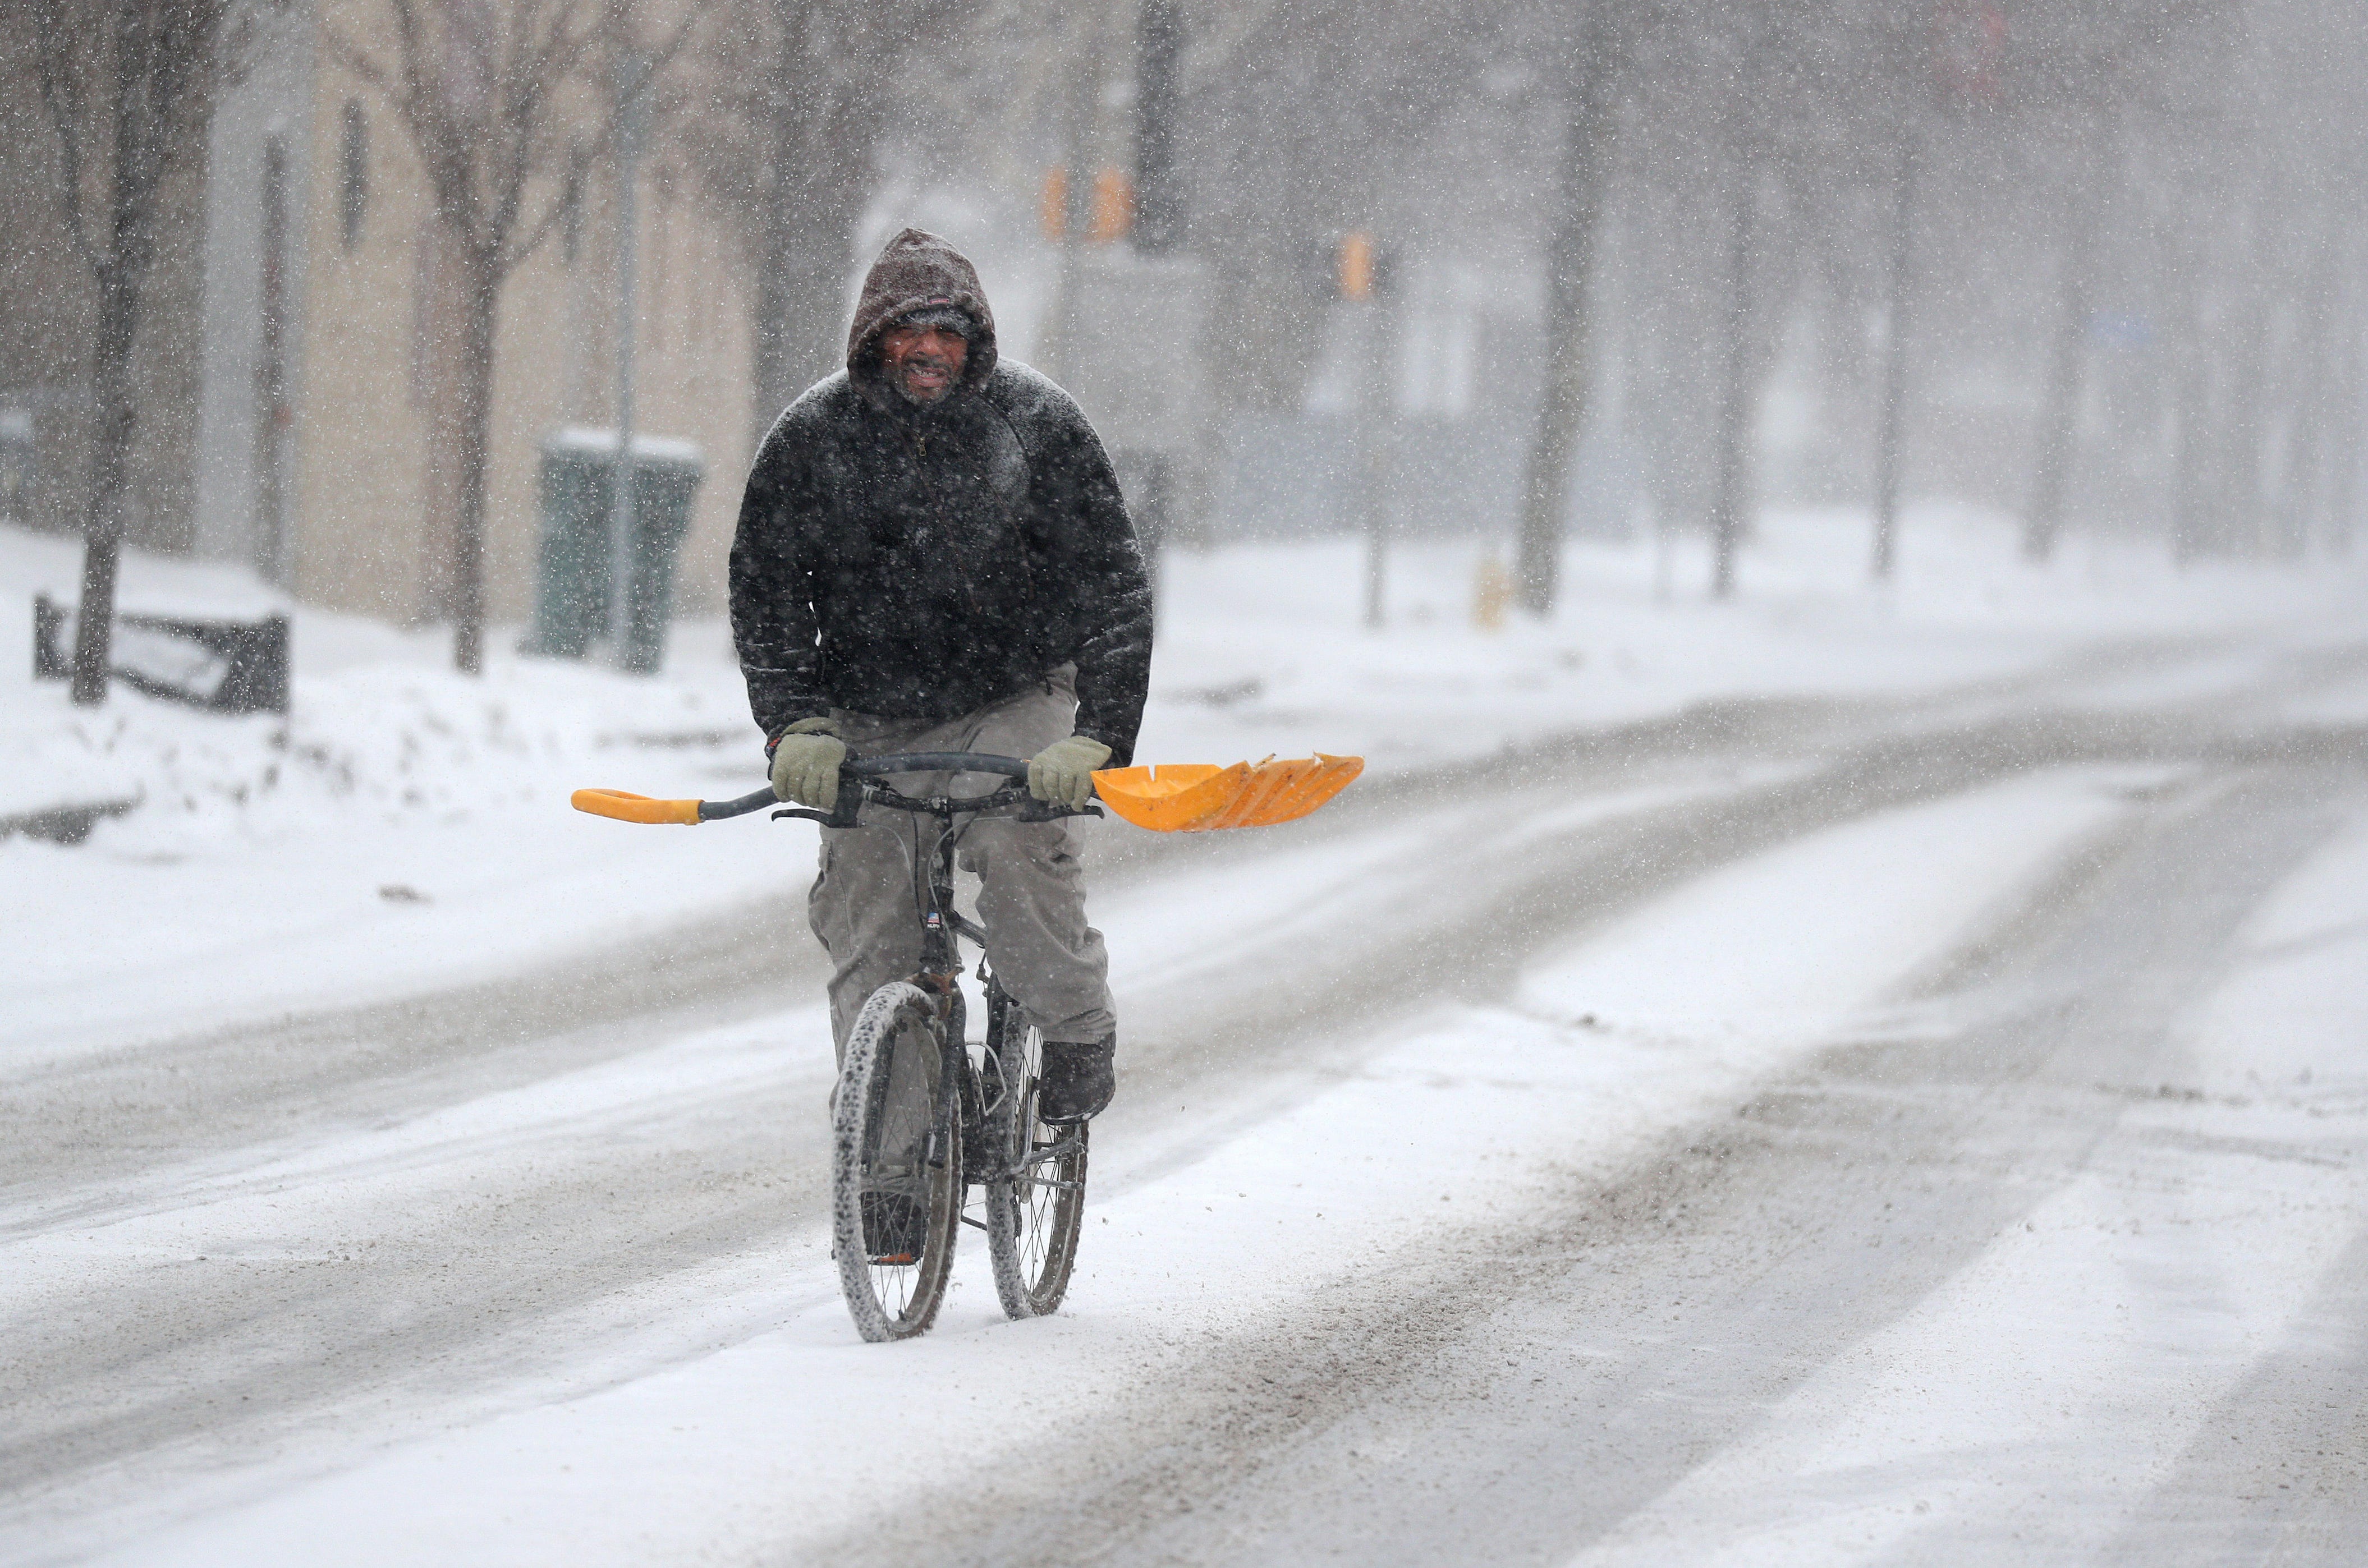 winter storm watch issued for parts of rochester region. how much snow will fall?